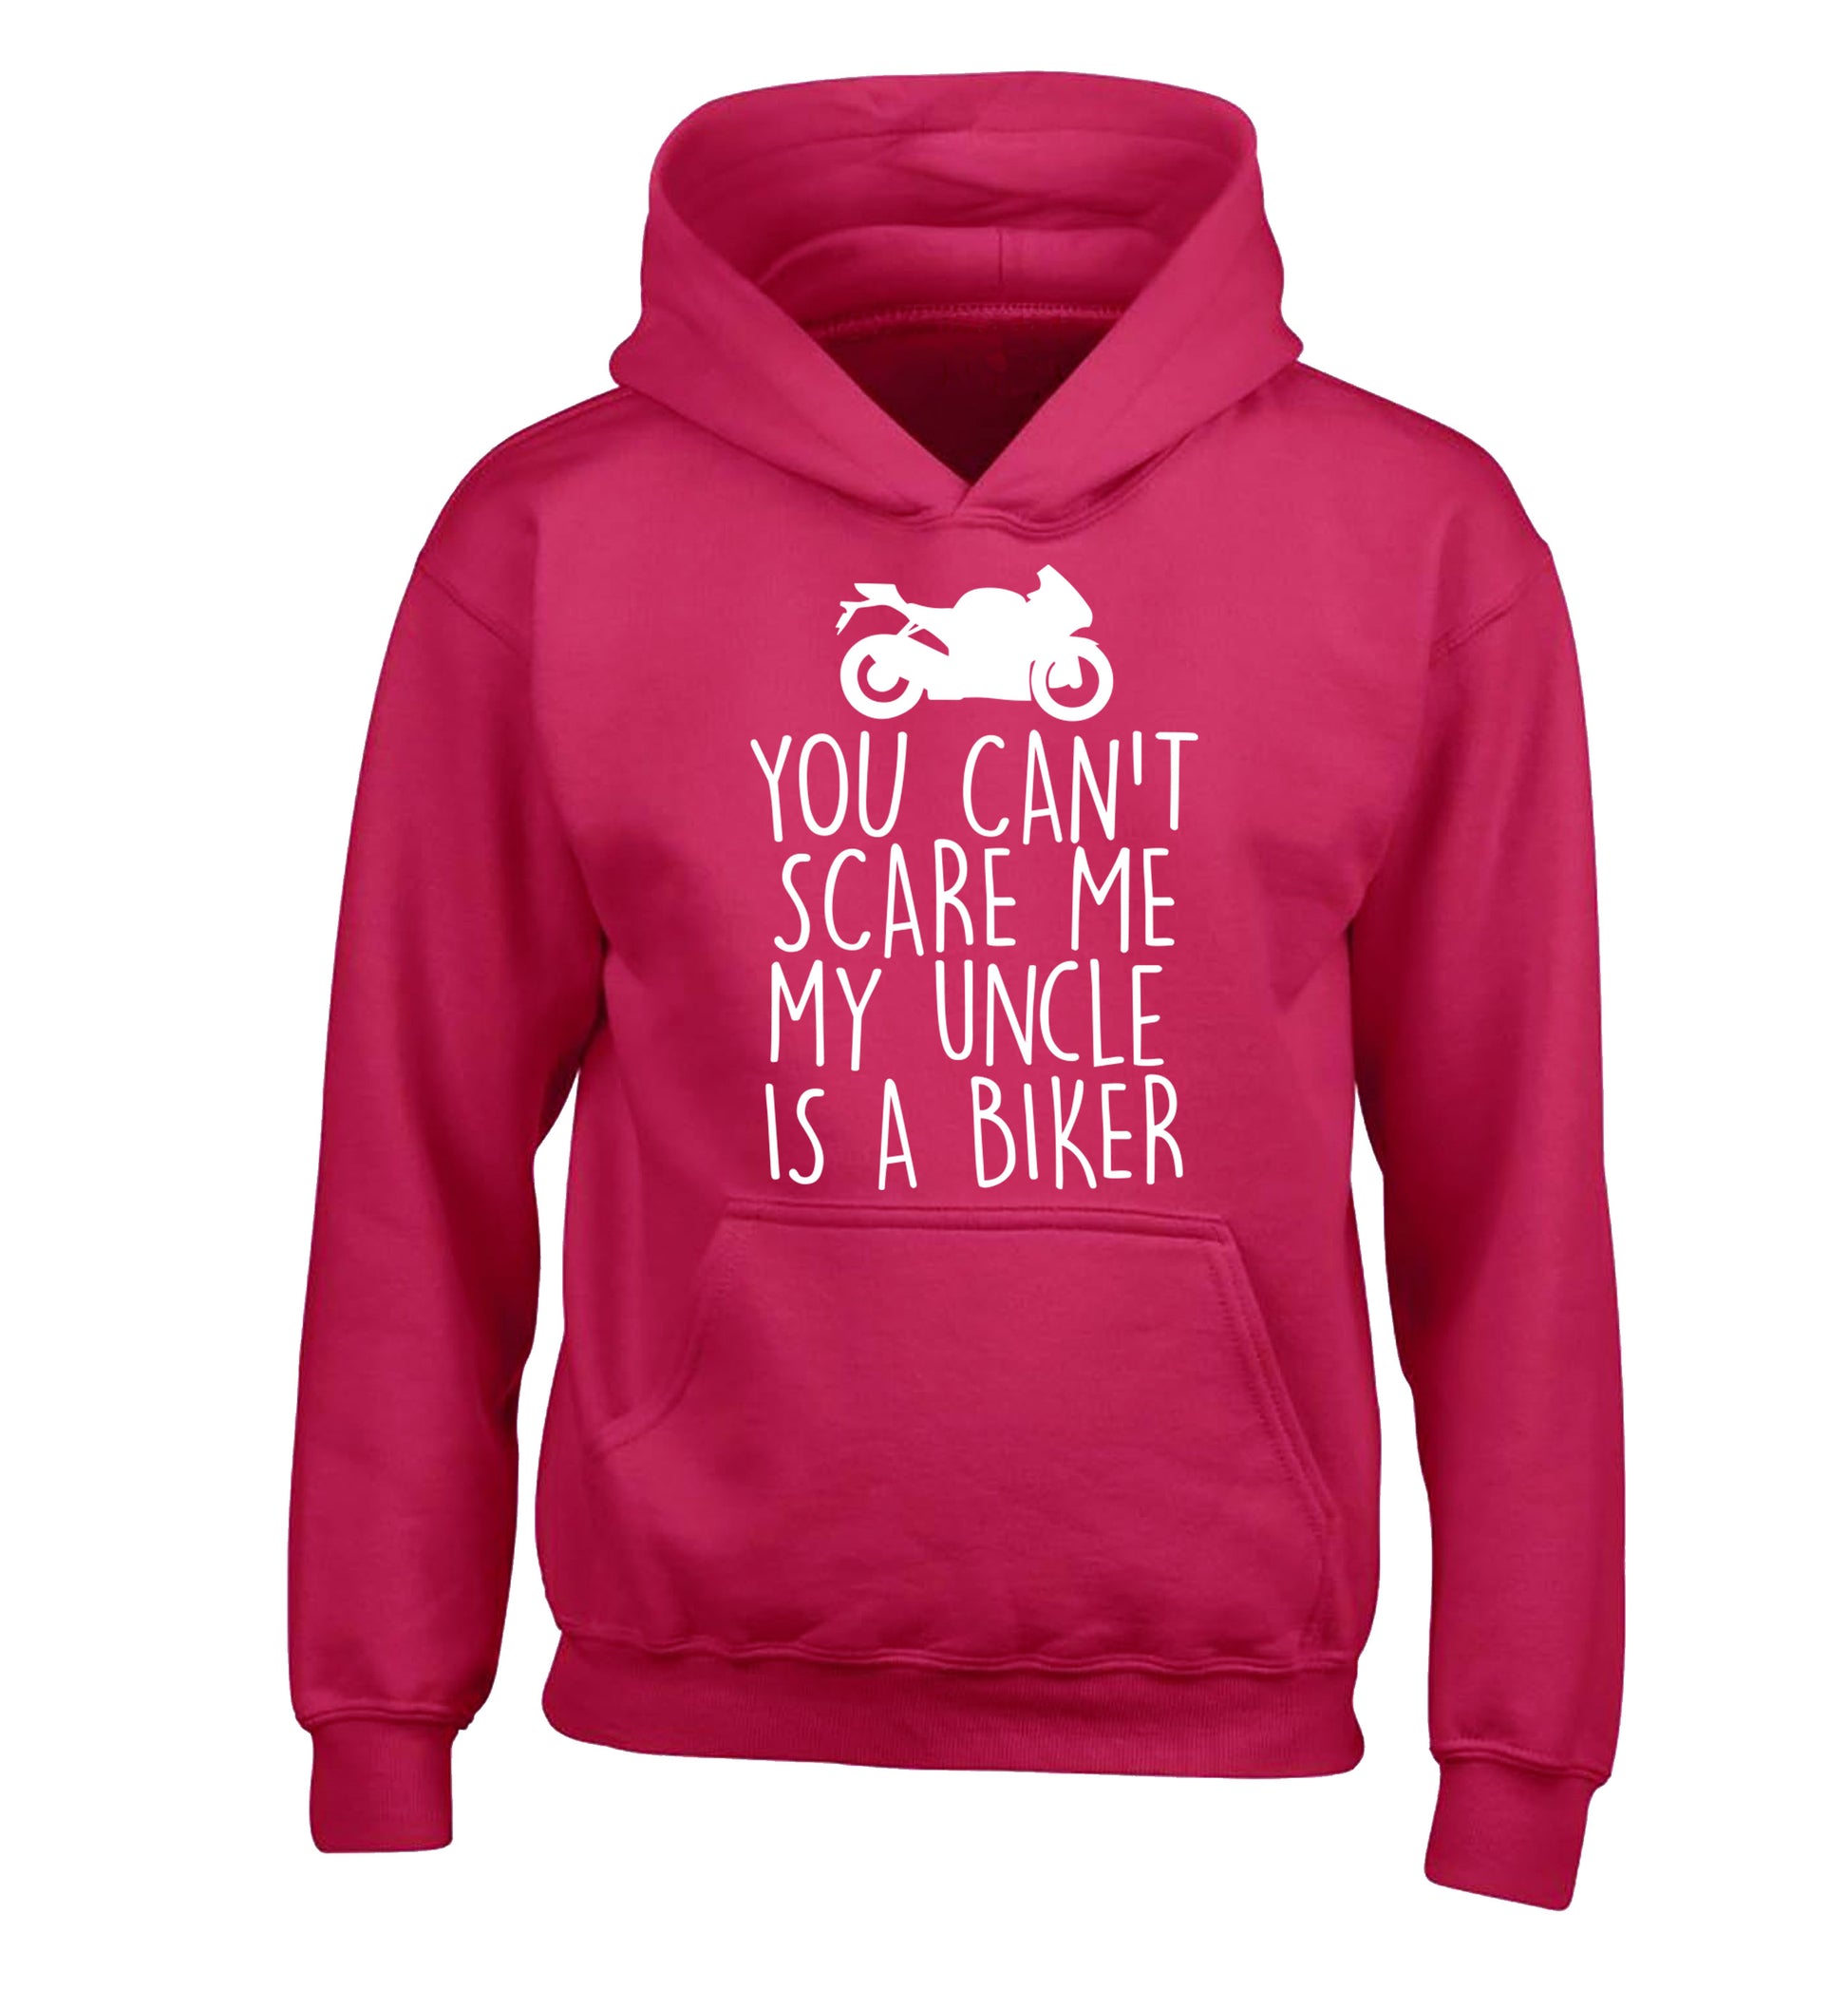 You can't scare me my uncle is a biker children's pink hoodie 12-13 Years